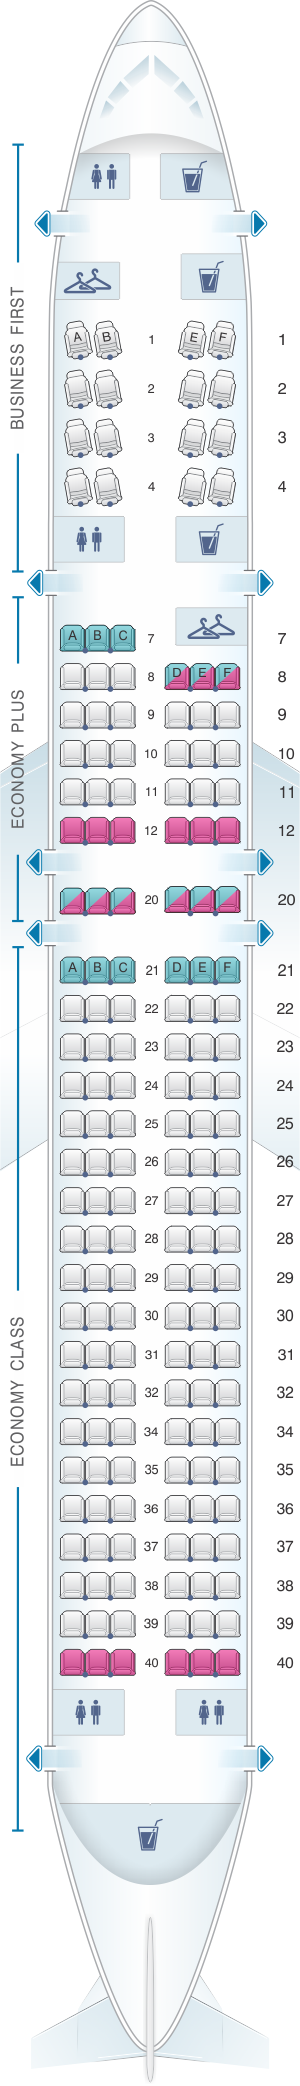 Seat Map United Airlines Boeing B757 200 (752) - version 2 ...